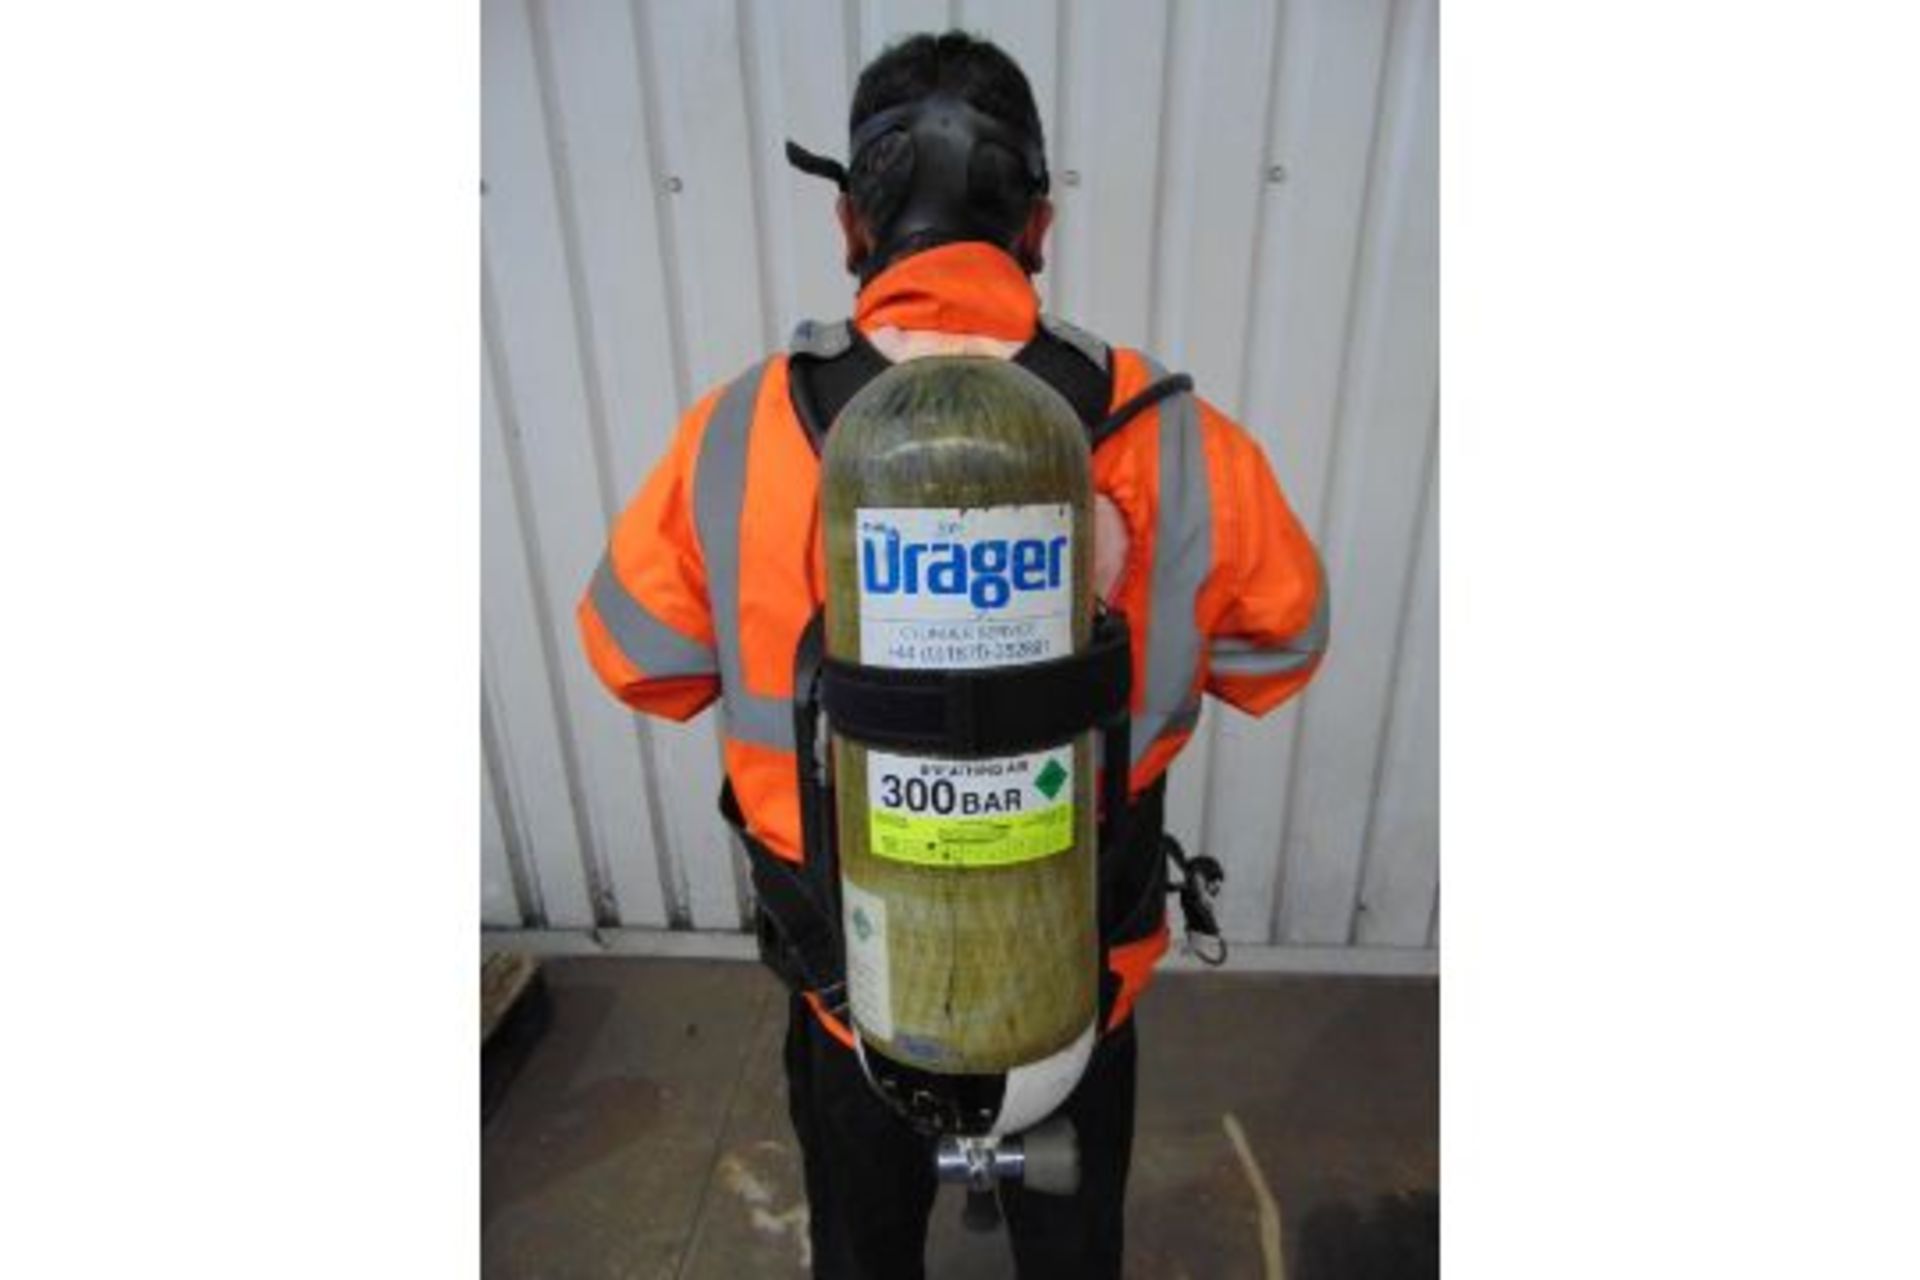 Drager PSS 7000 Self Contained Breathing Apparatus w/ 2 x Drager 300 Bar Air Cylinders - Image 15 of 18